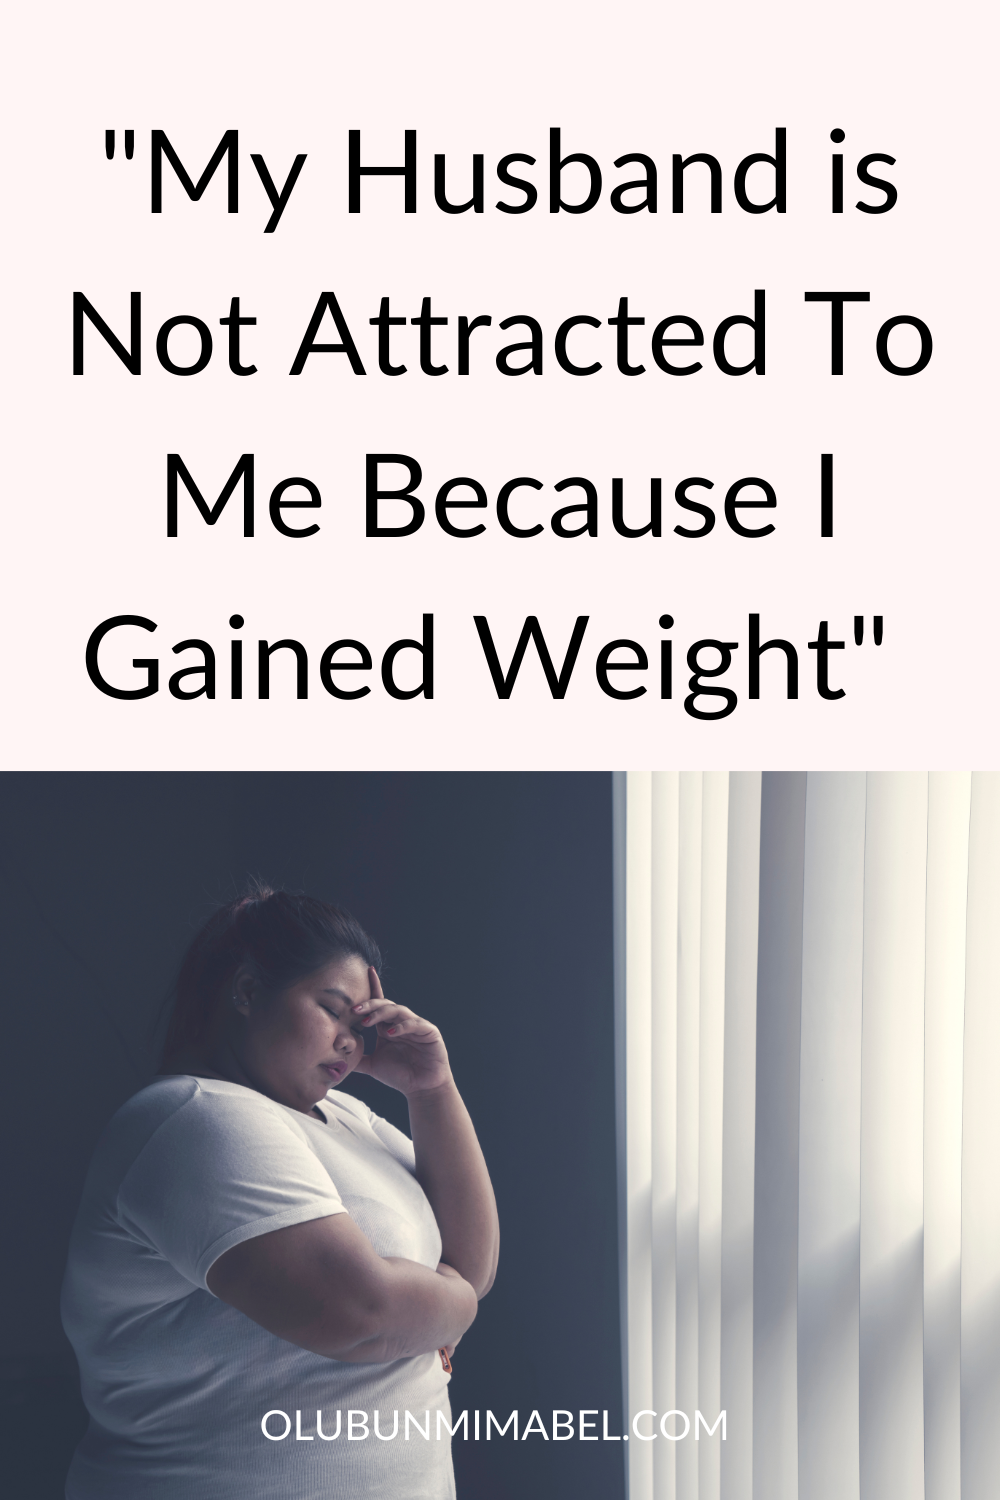 ''My Husband is Not Attracted To Me Because I Gained Weight''